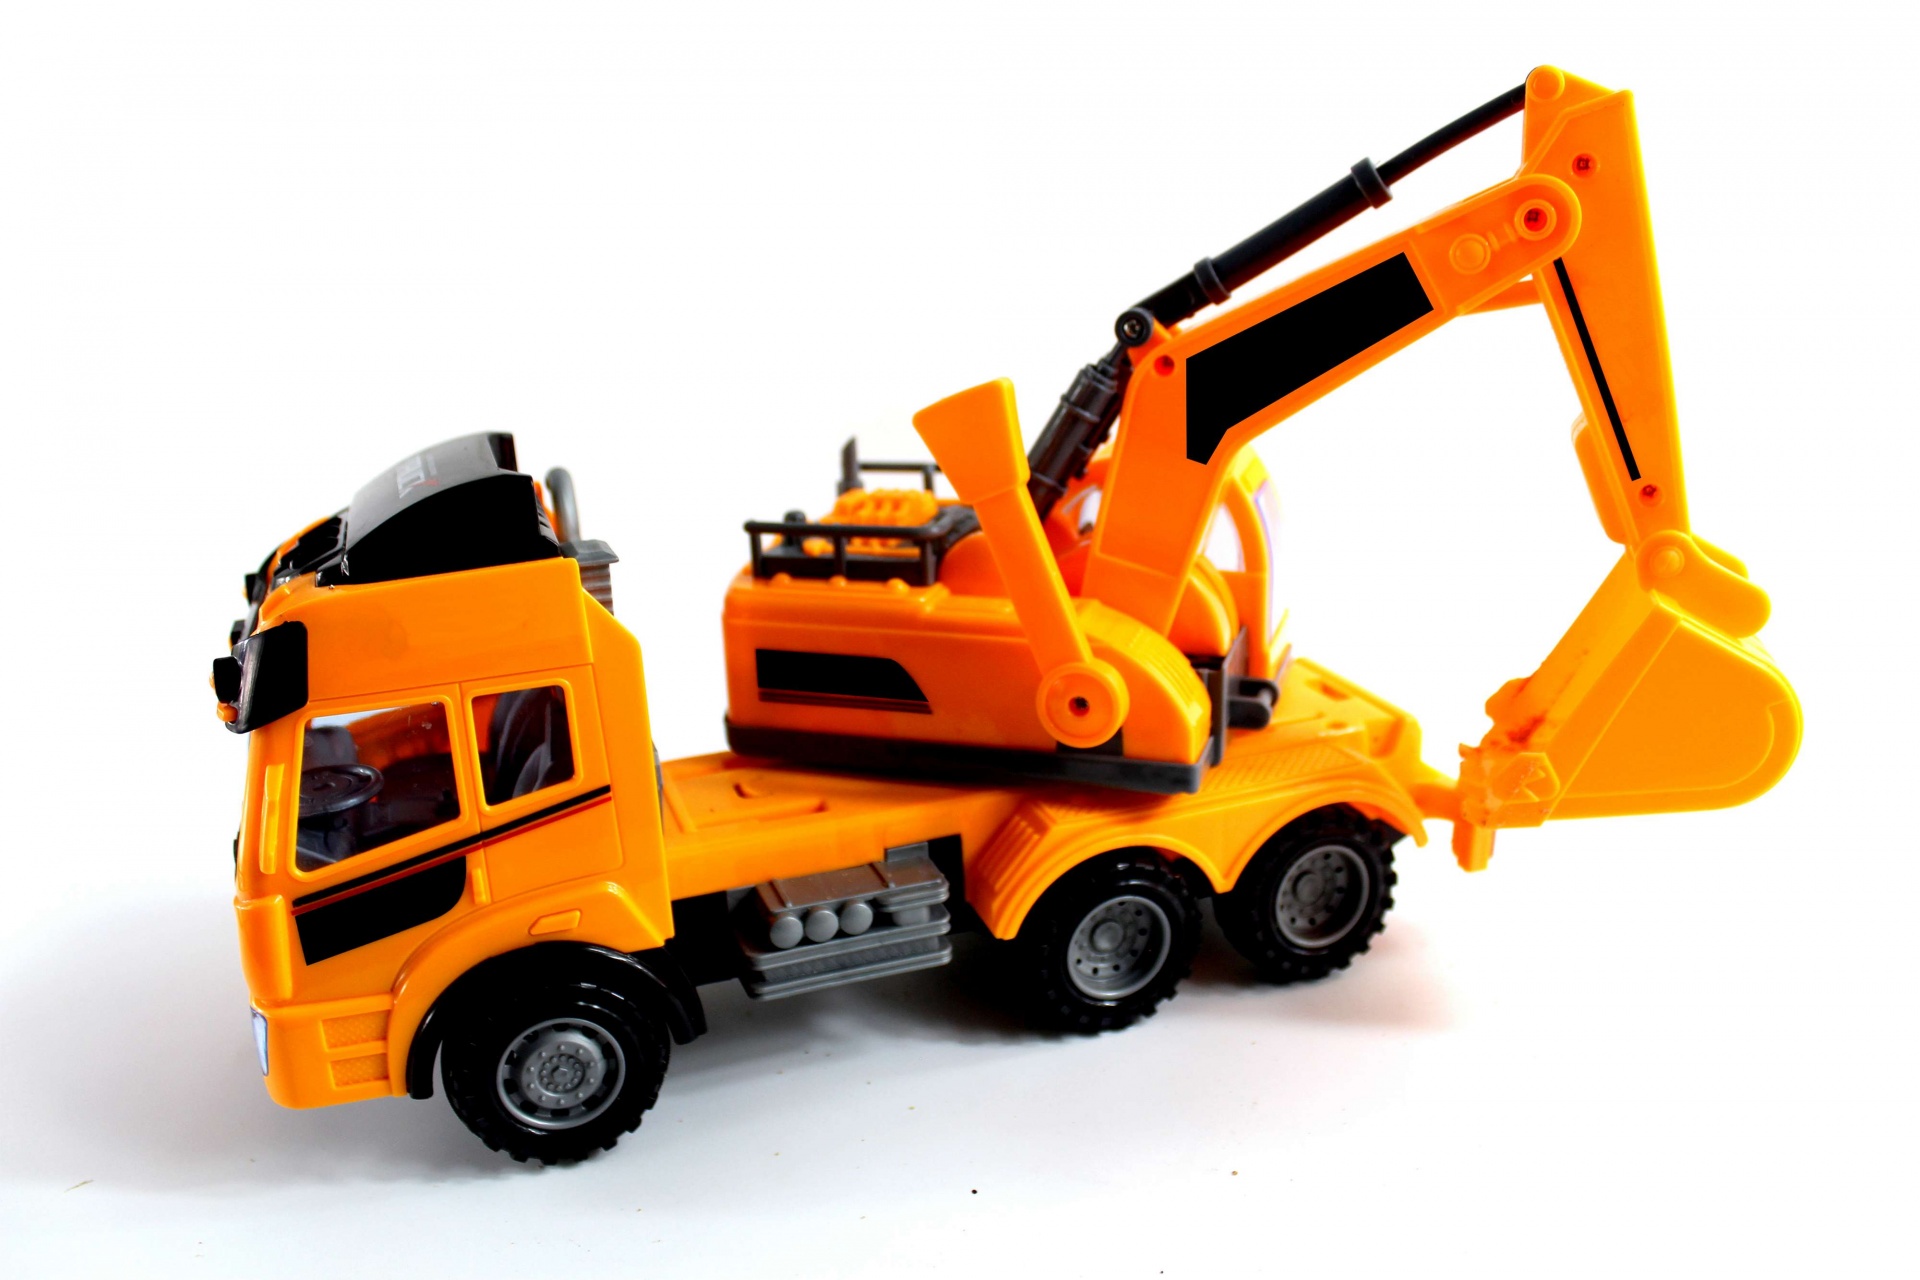 Toy Backhoe With Truck